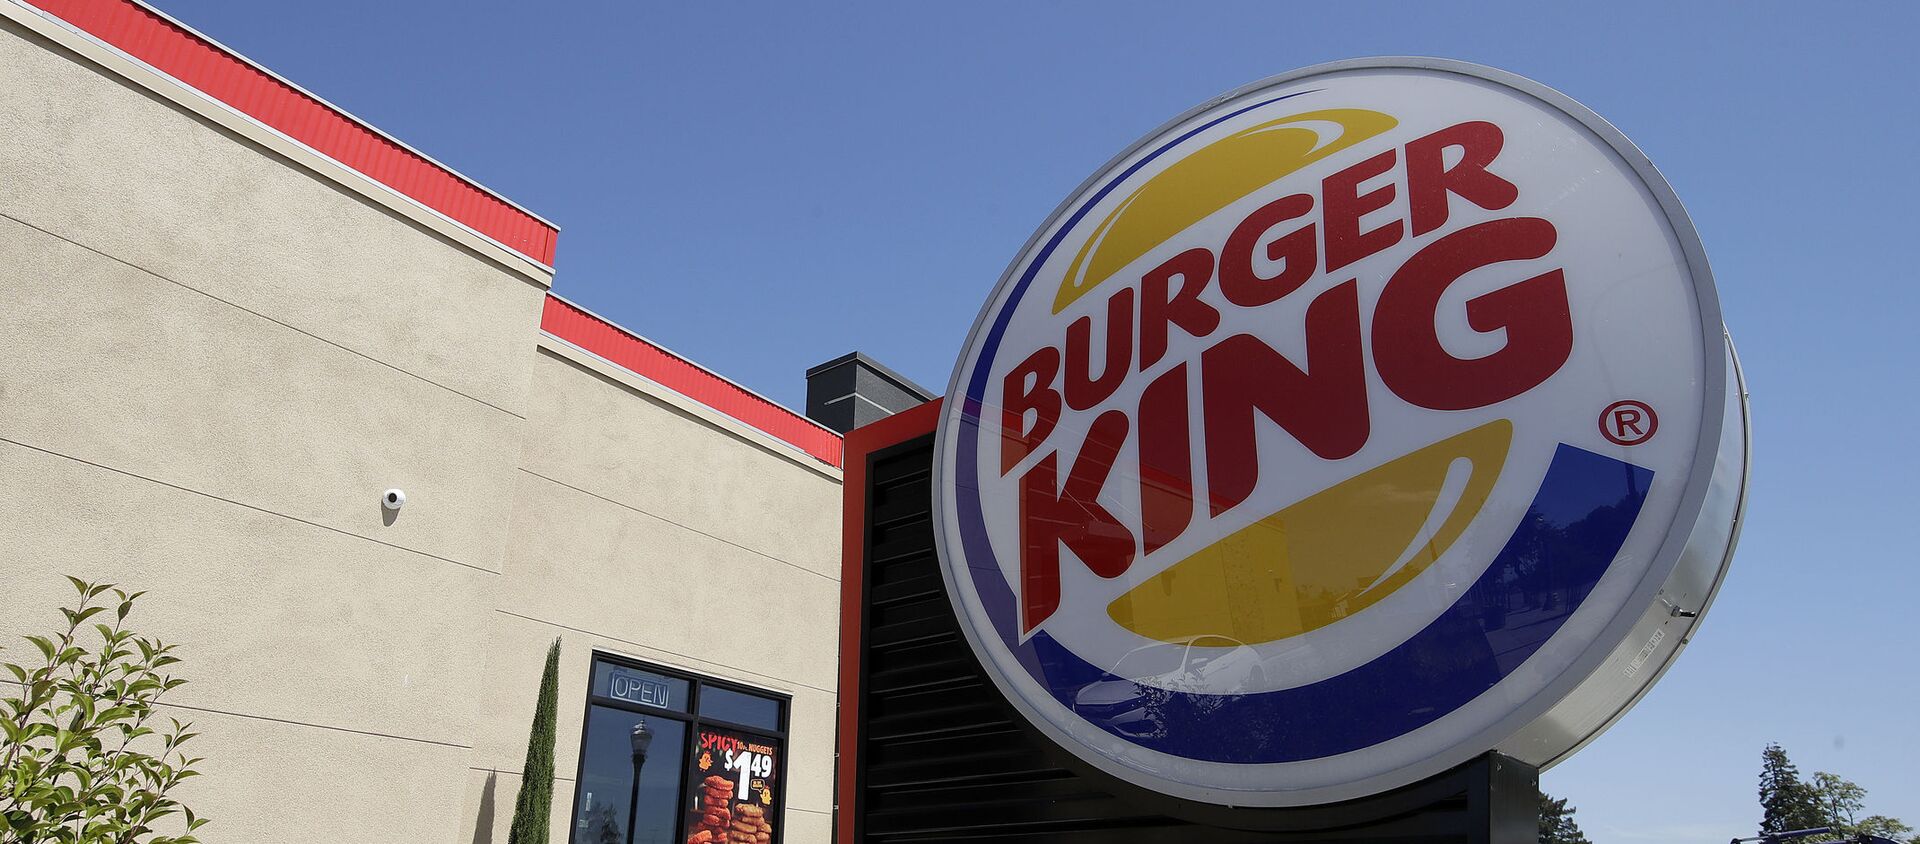 his April 25, 2019, file photo shows a Burger King in Redwood City, Calif. Burger King is introducing a plant-based burger in Europe. But it's not the Impossible Whopper that's been a hit with U.S. customers. Instead, a Dutch company called The Vegetarian Butcher will supply the new soy-based Rebel Whopper. It will go on sale Tuesday, Nov. 12, at 2,400 restaurants across Europe.  - Sputnik International, 1920, 09.03.2021